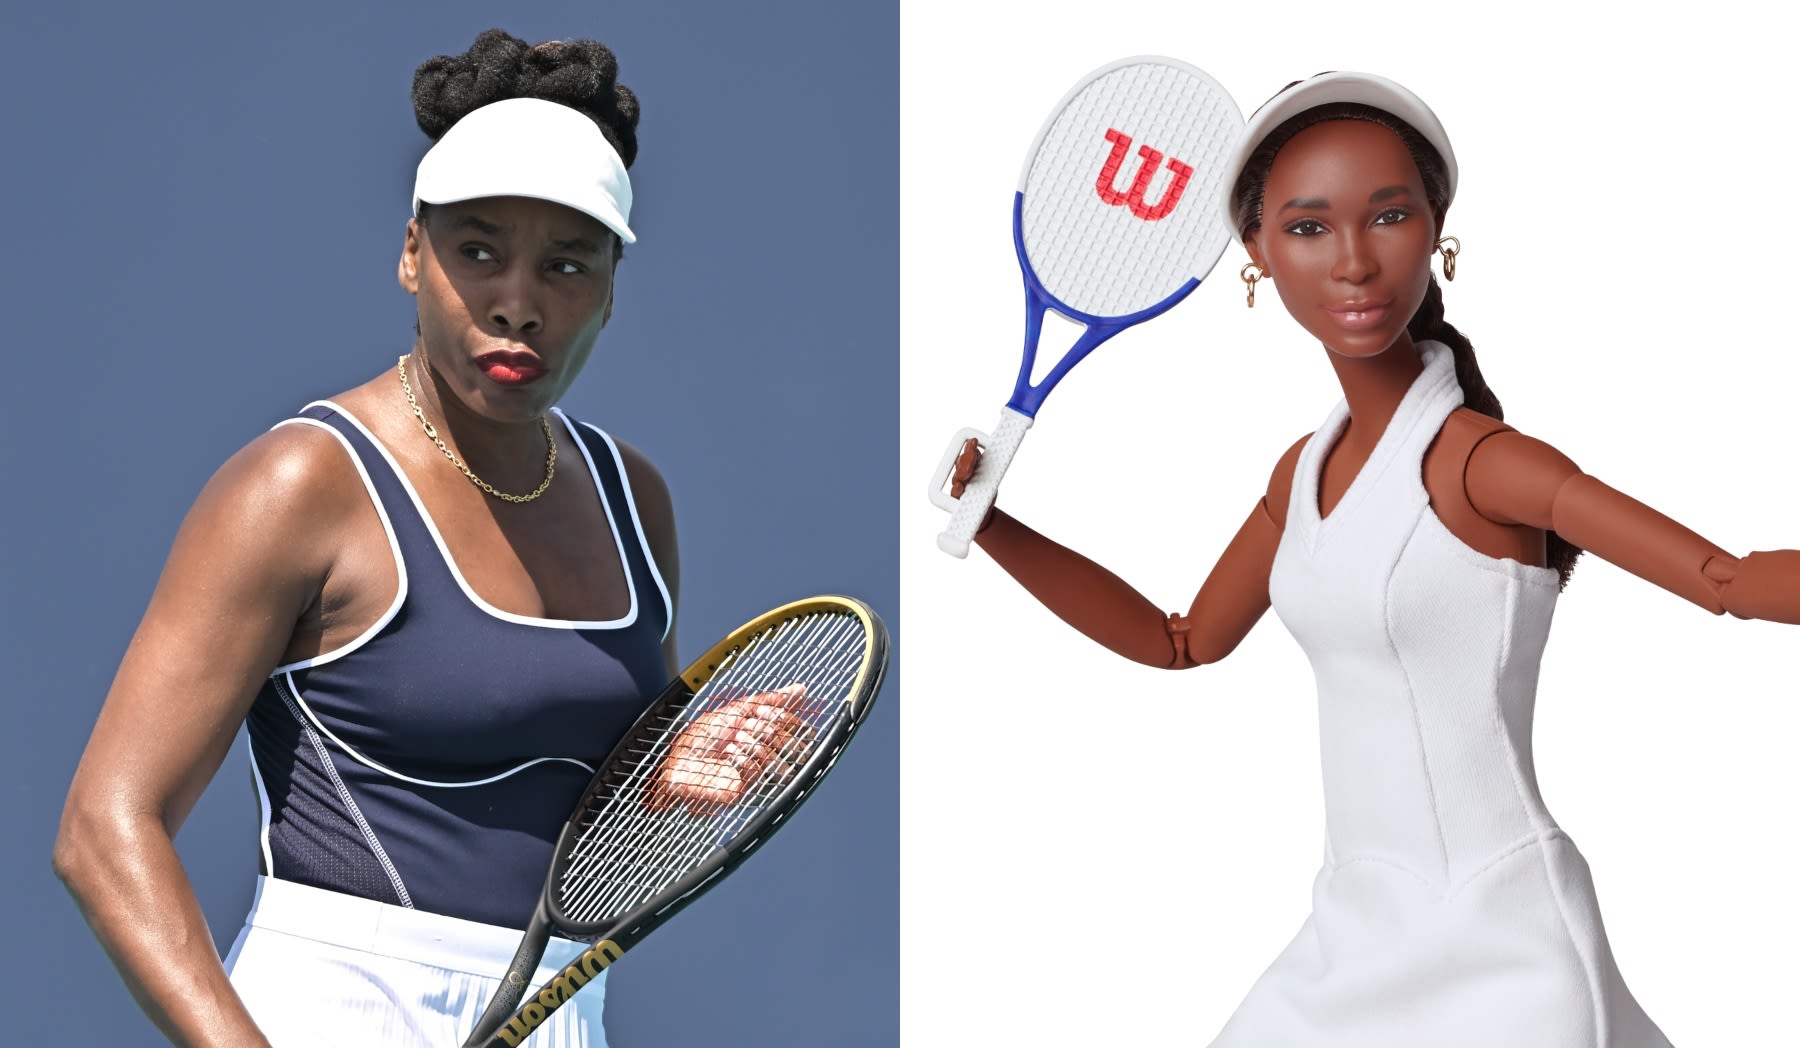 Venus Williams and Eight Other Female Athletes Get Their Own Barbie Dolls With Mattel’s Latest 65th Anniversary Release